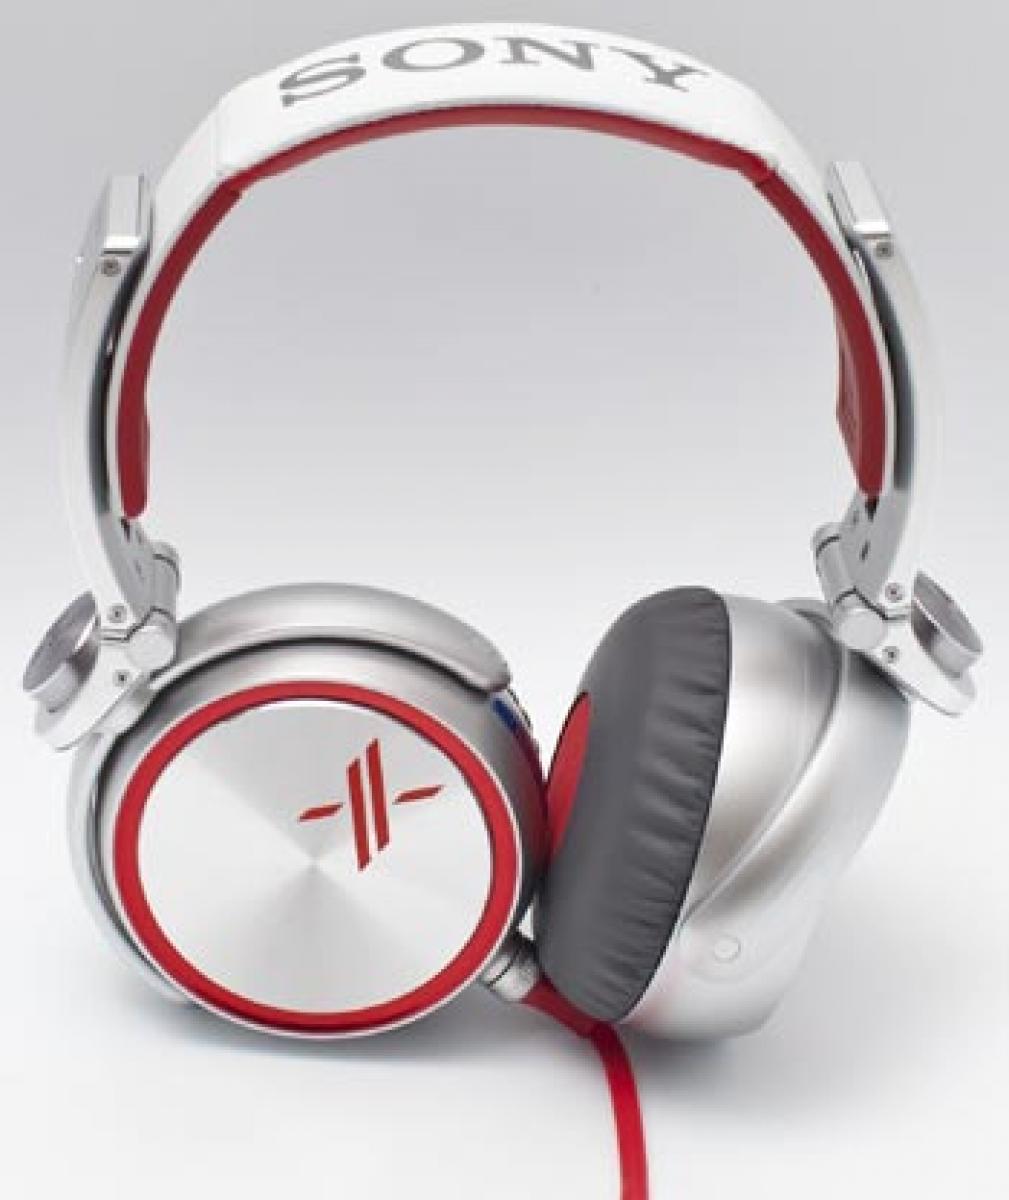 Sony launches new MDR  series headphones